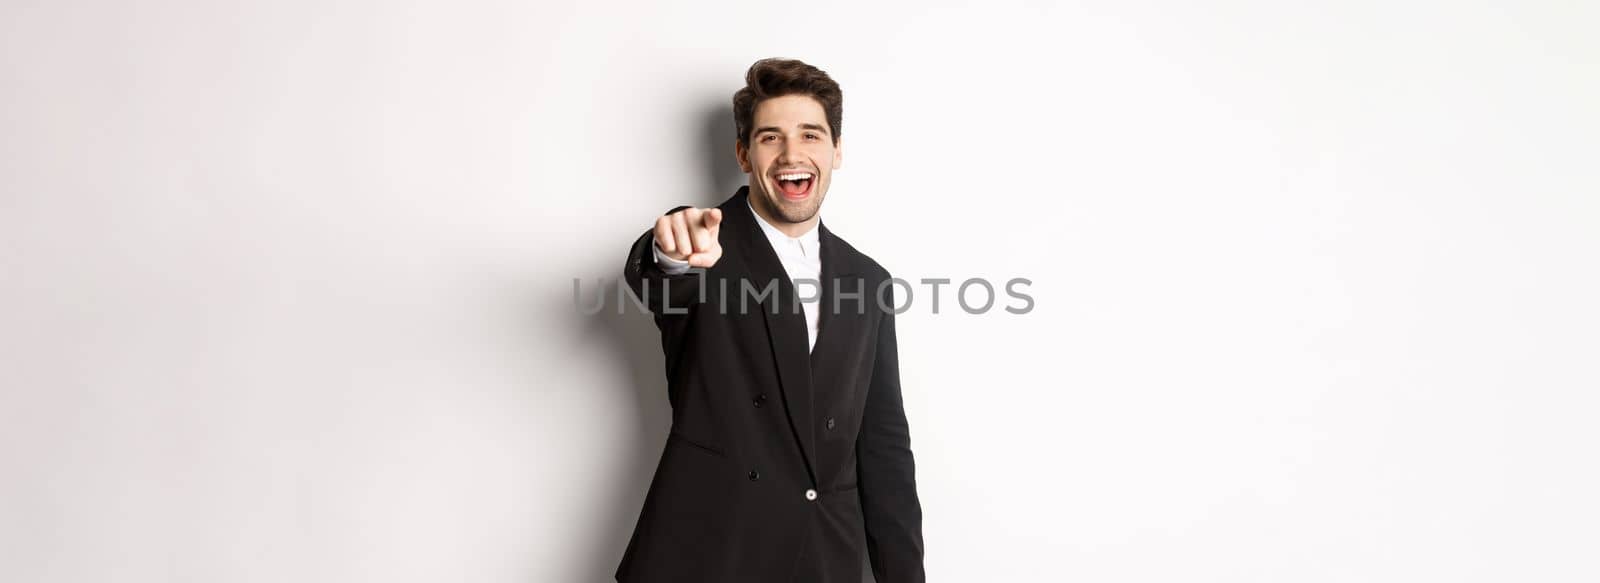 Concept of new year party, celebration and lifestyle. Portrait of handsome stylish man in black suit, smiling and pointing finger at camera, standing over white background.